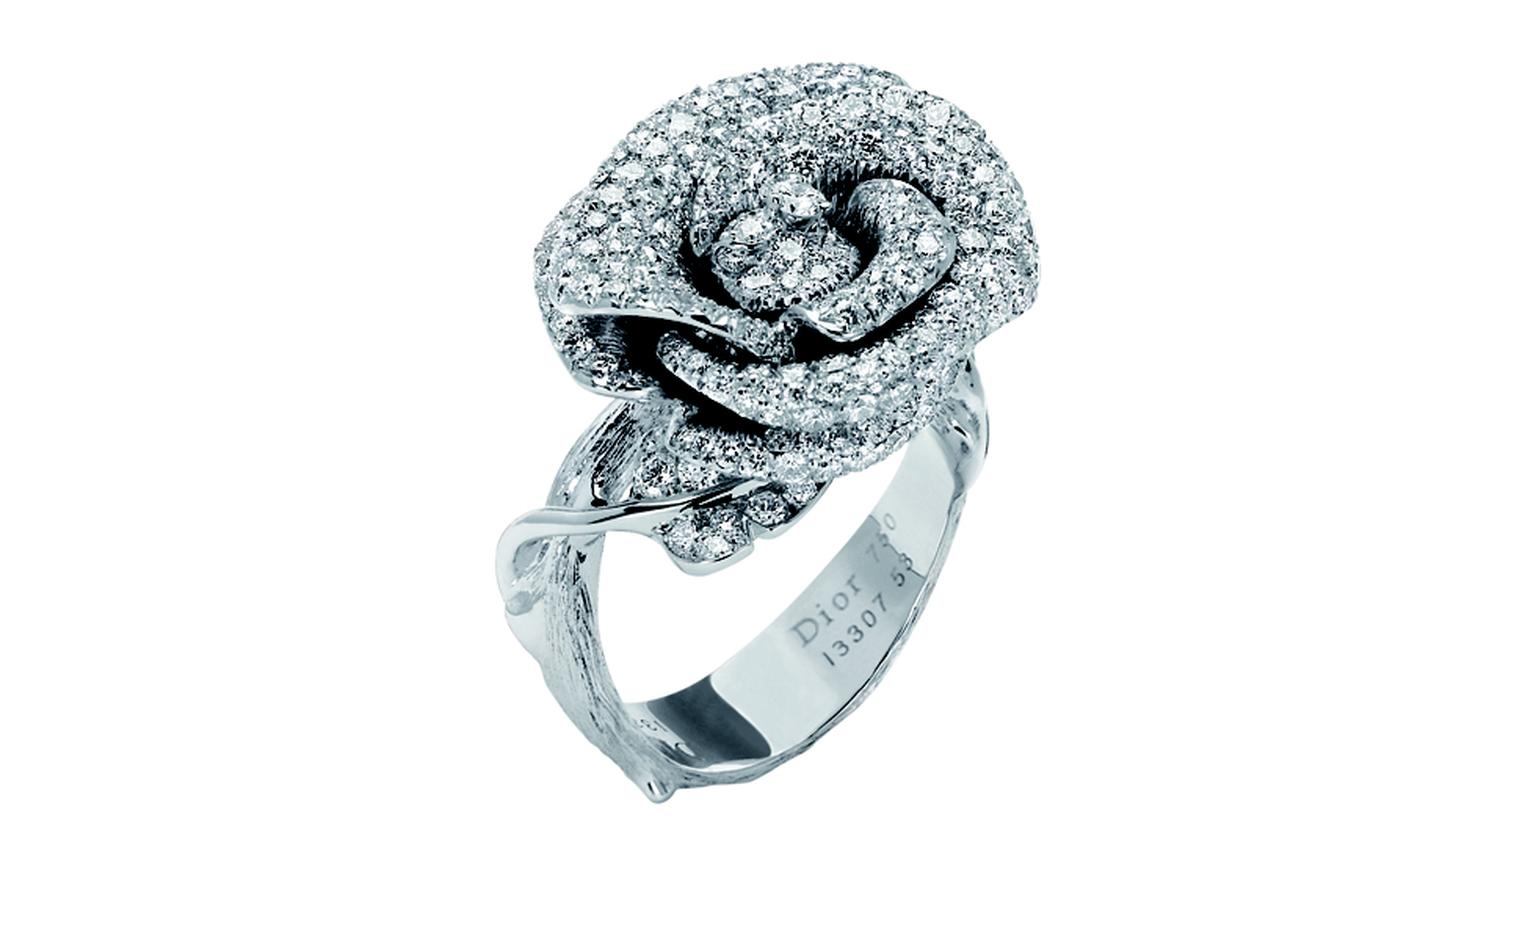 DIOR, Bagatelle ring in white gold with diamonds. Price from £17,000